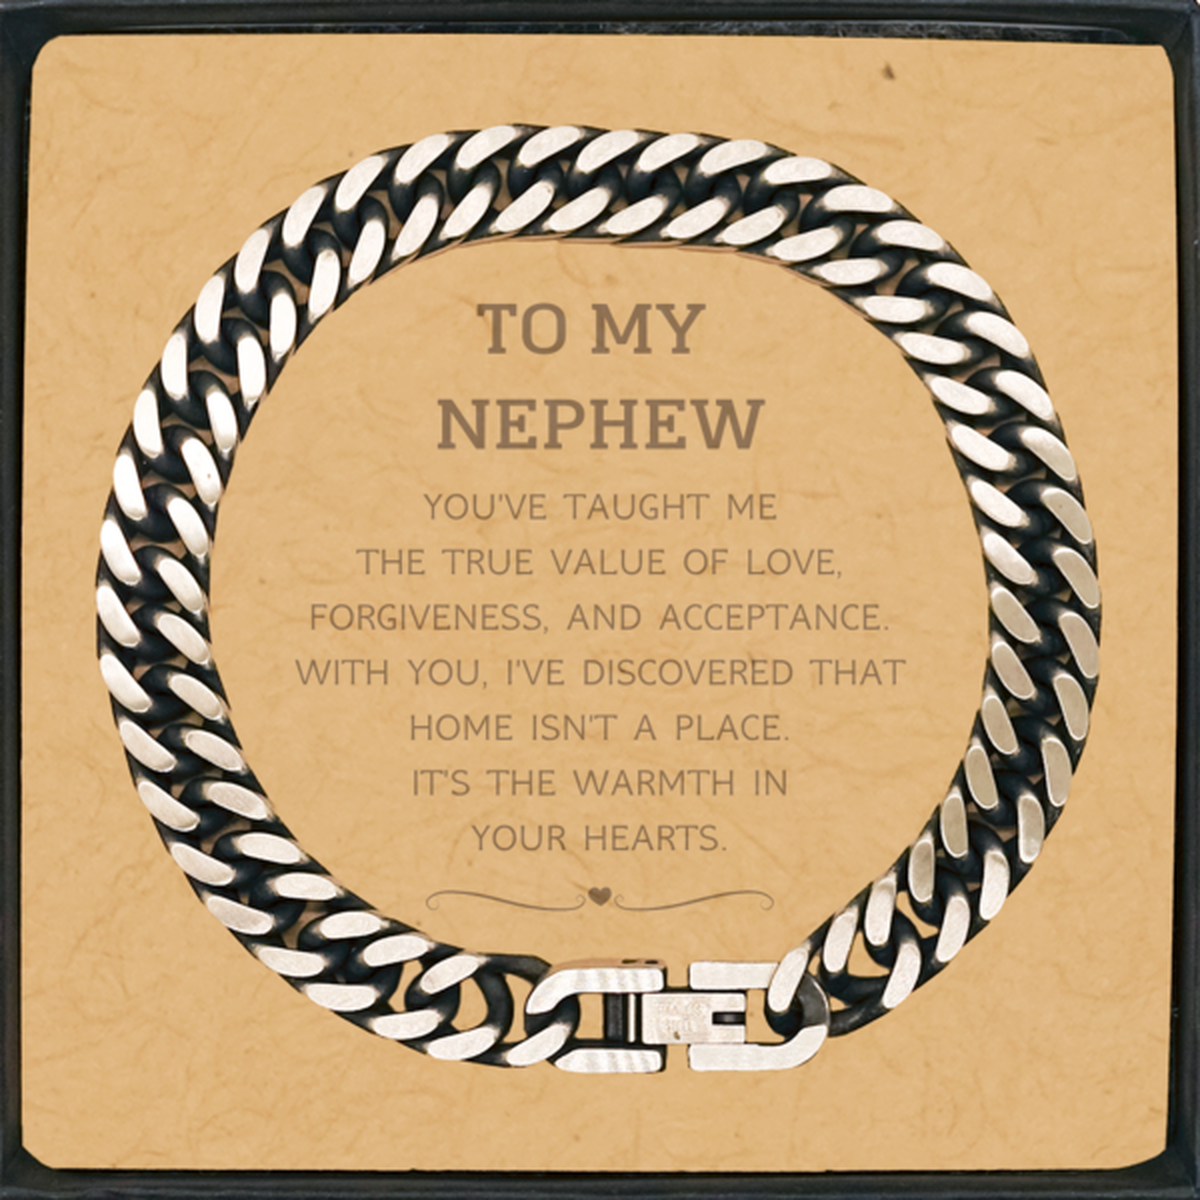 To My Nephew Gifts, You've taught me the true value of love, Thank You Gifts For Nephew, Birthday Cuban Link Chain Bracelet For Nephew